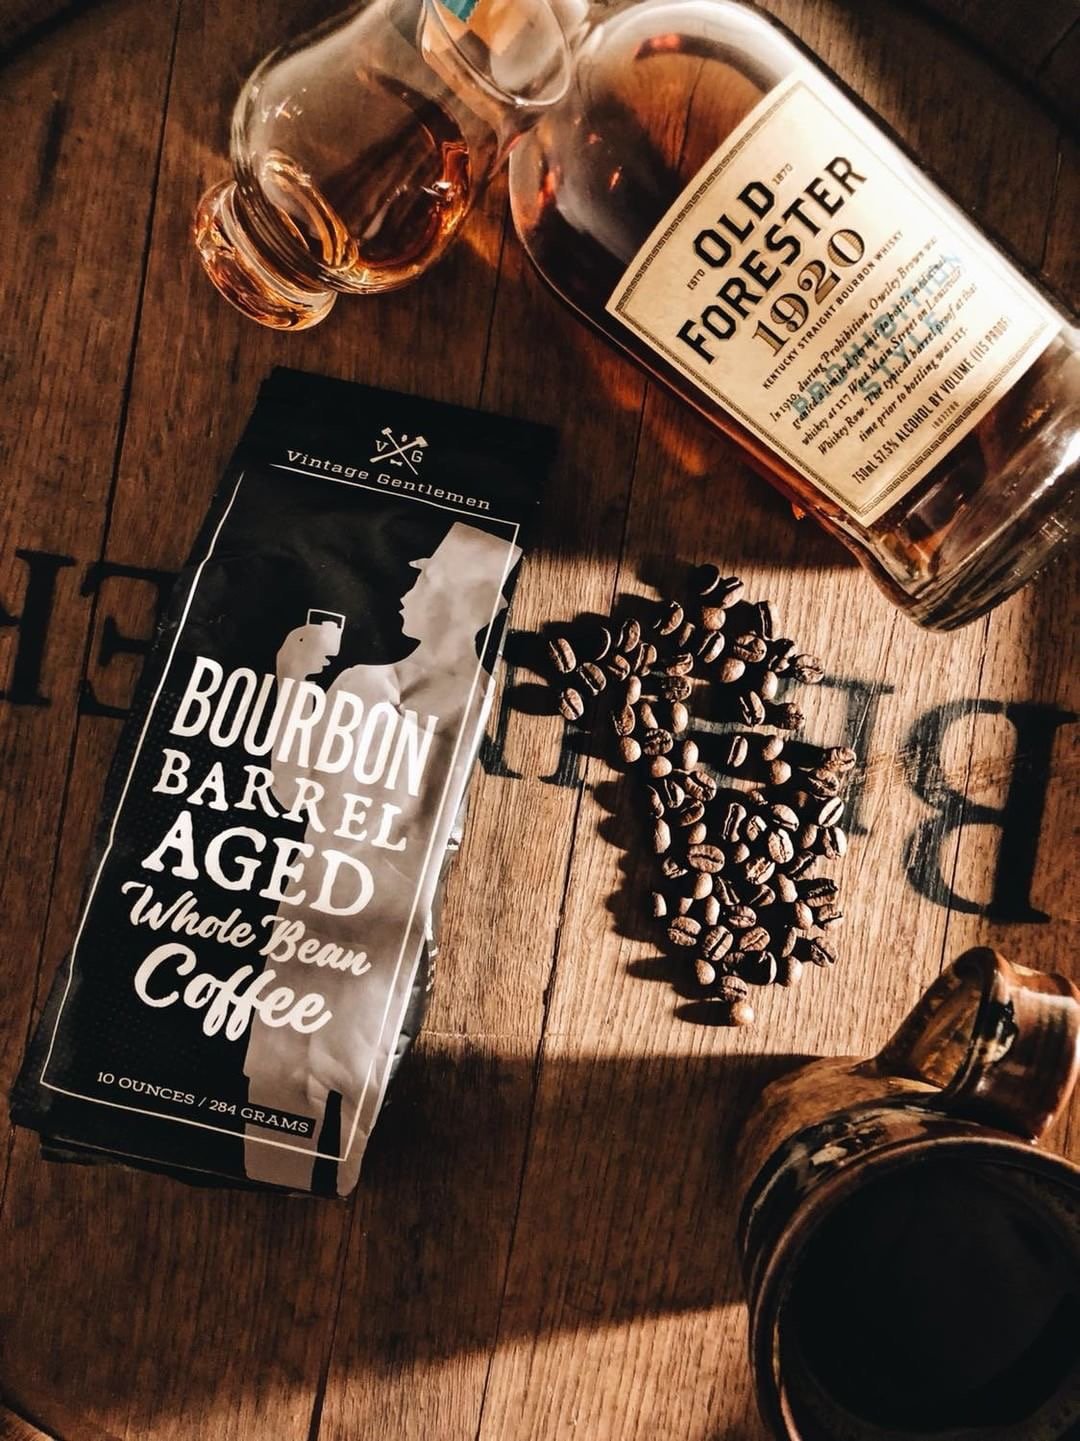 Bourbon Barrel Aged Coffee- A Coffee For The Whiskey Lover